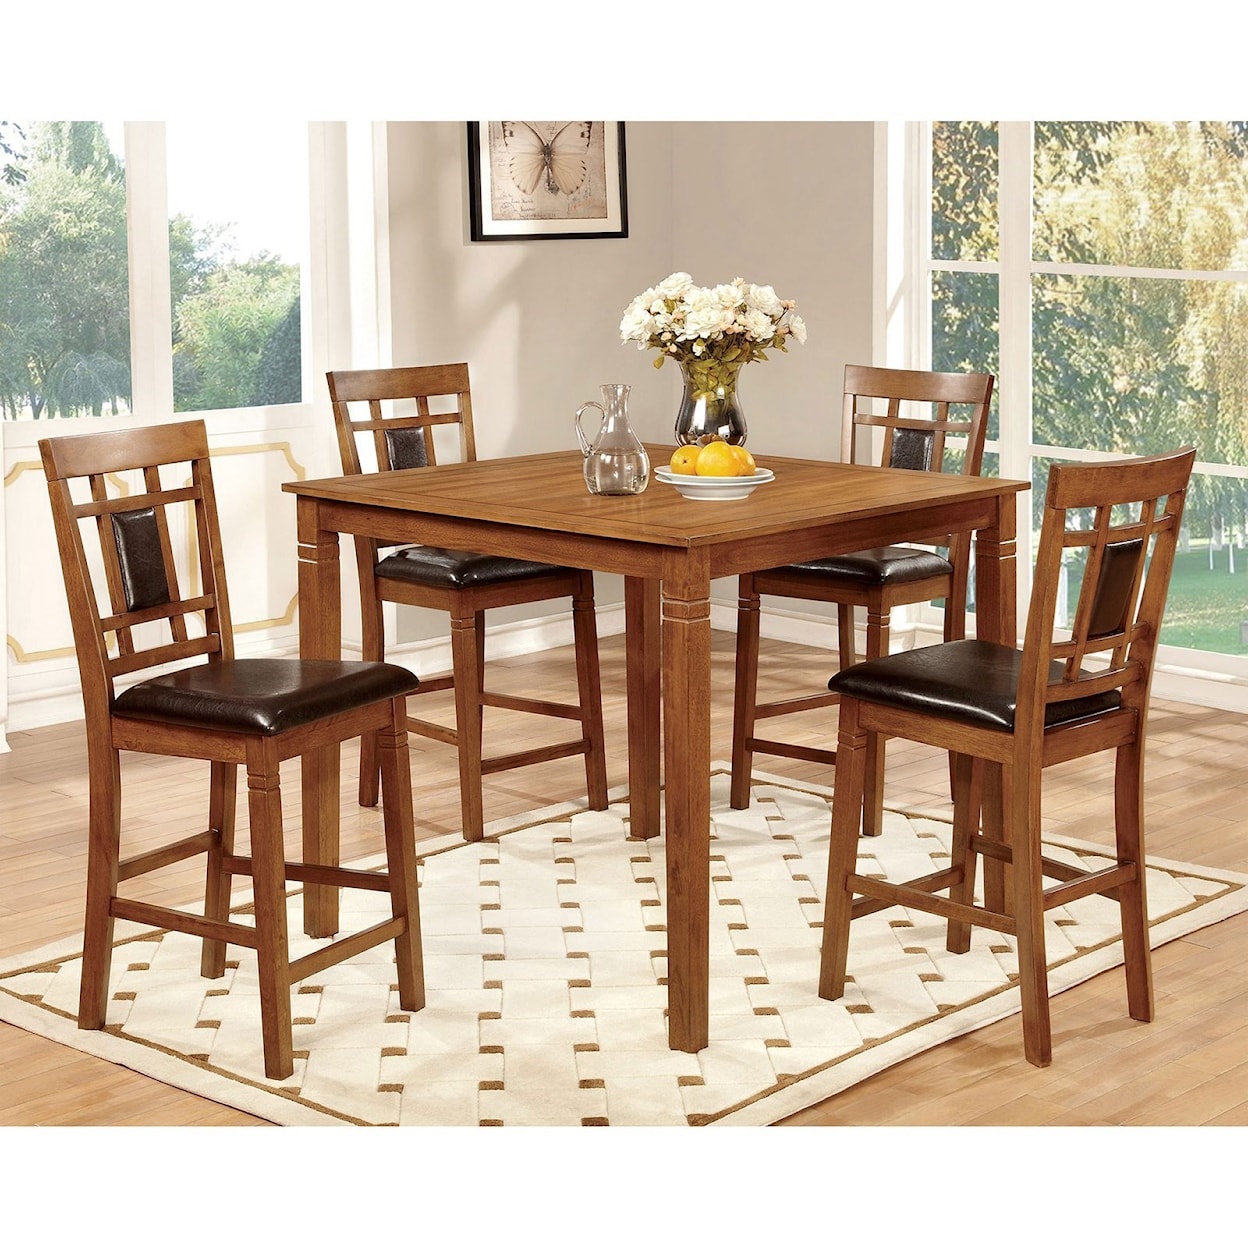 Furniture of America Freeman I 5 Piece Counter Height Table Set